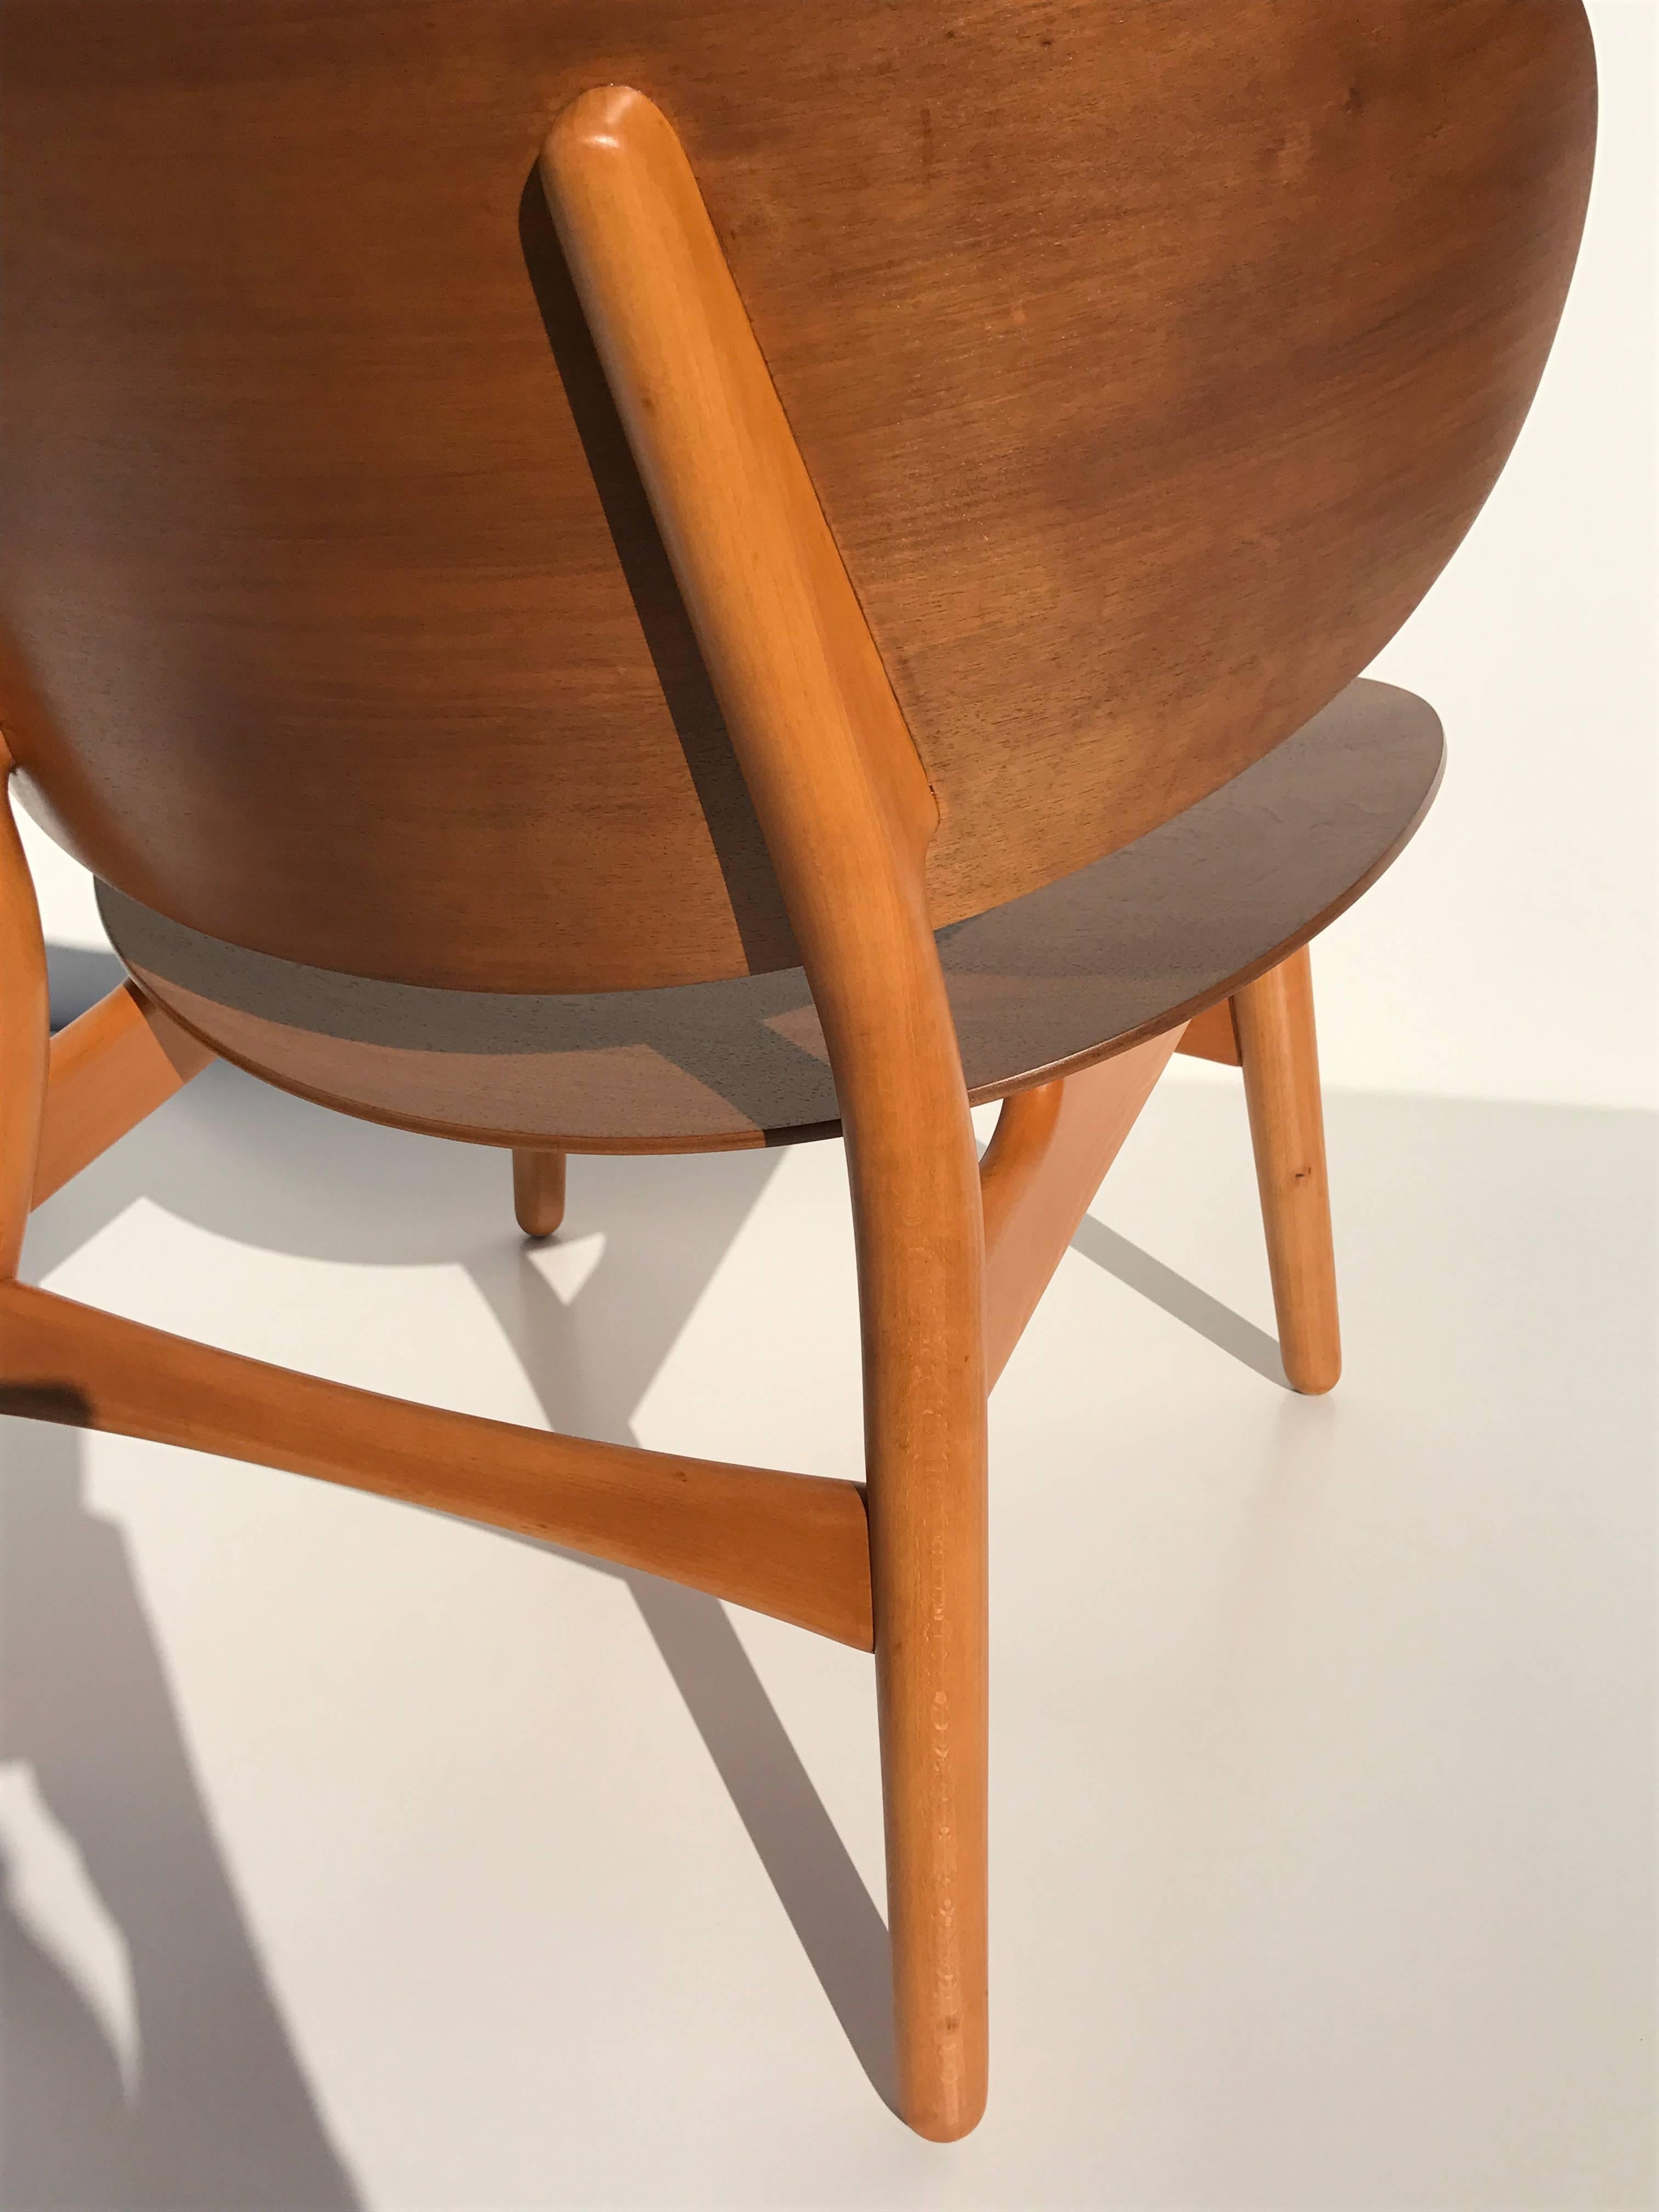 Shell Chair by Hans Wegner in Walnut and Beech In Excellent Condition For Sale In North Hollywood, CA